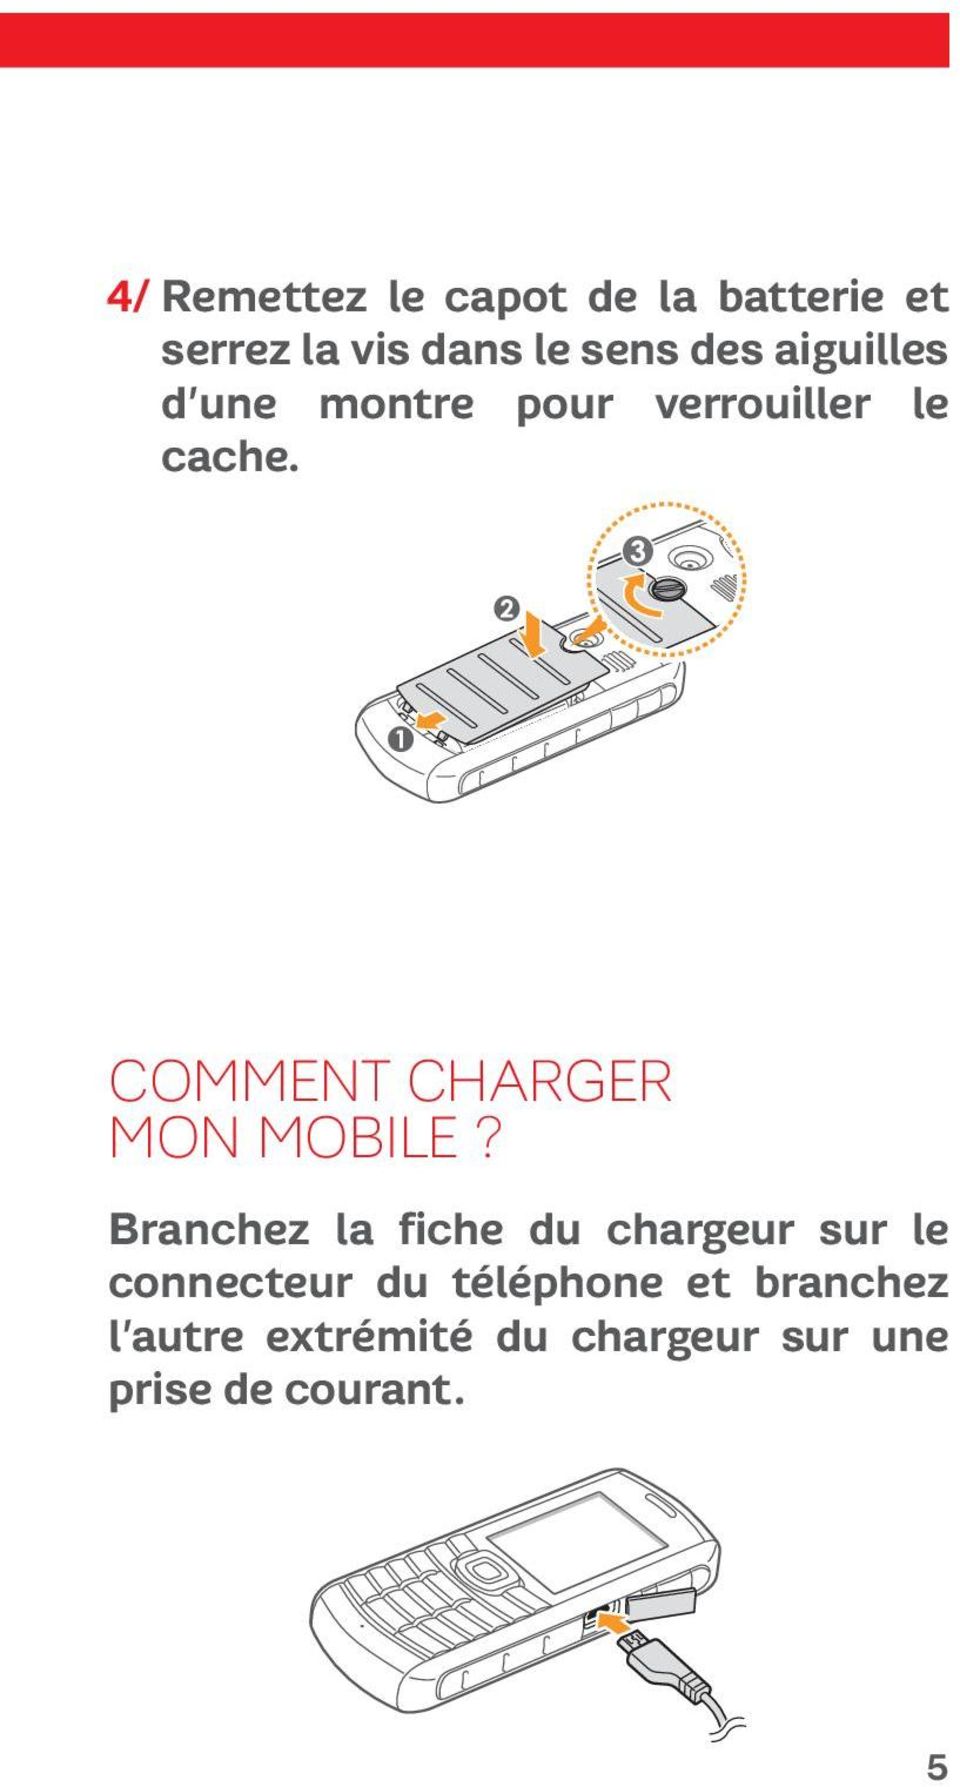 comment charger Mon mobile?